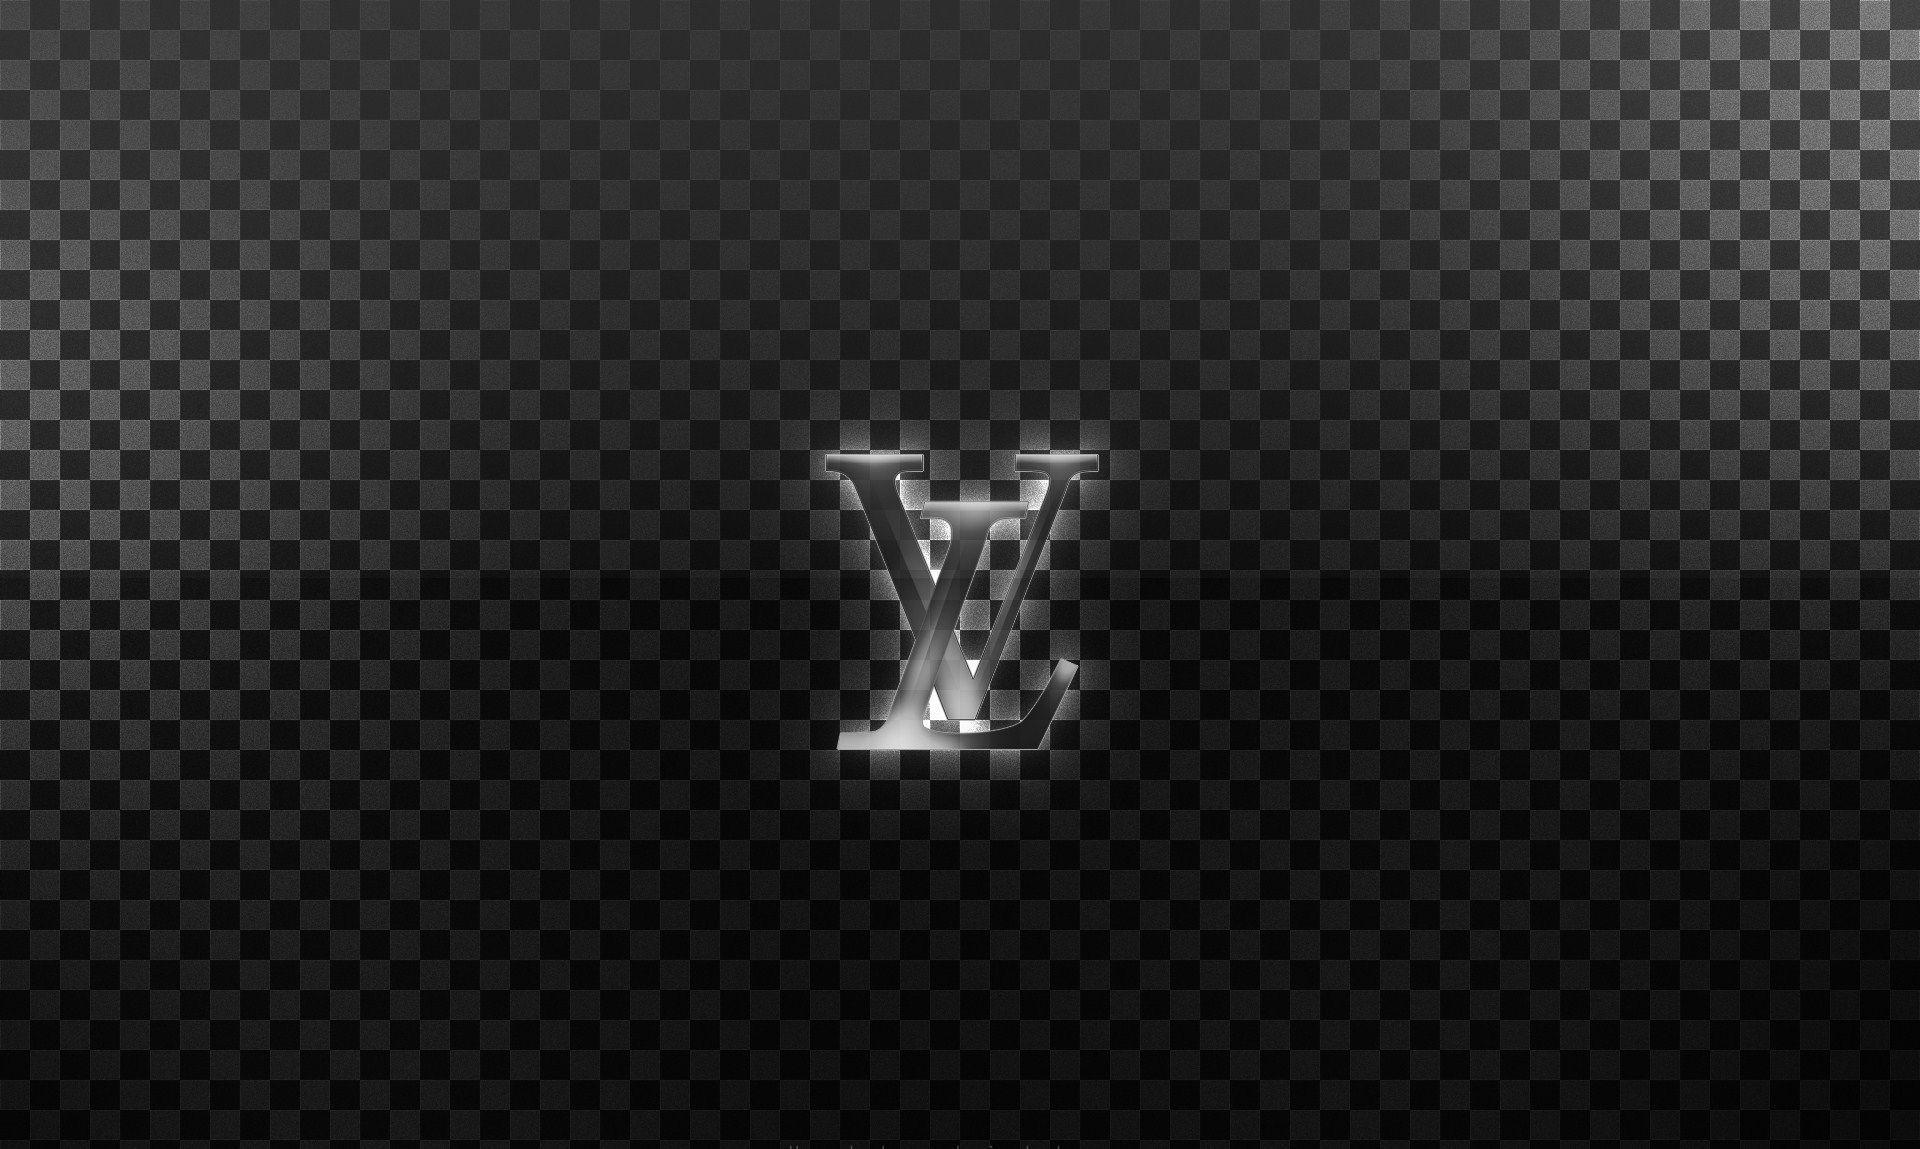 Louis Vuitton wallpapers & Backgrounds – 4kwallpapers